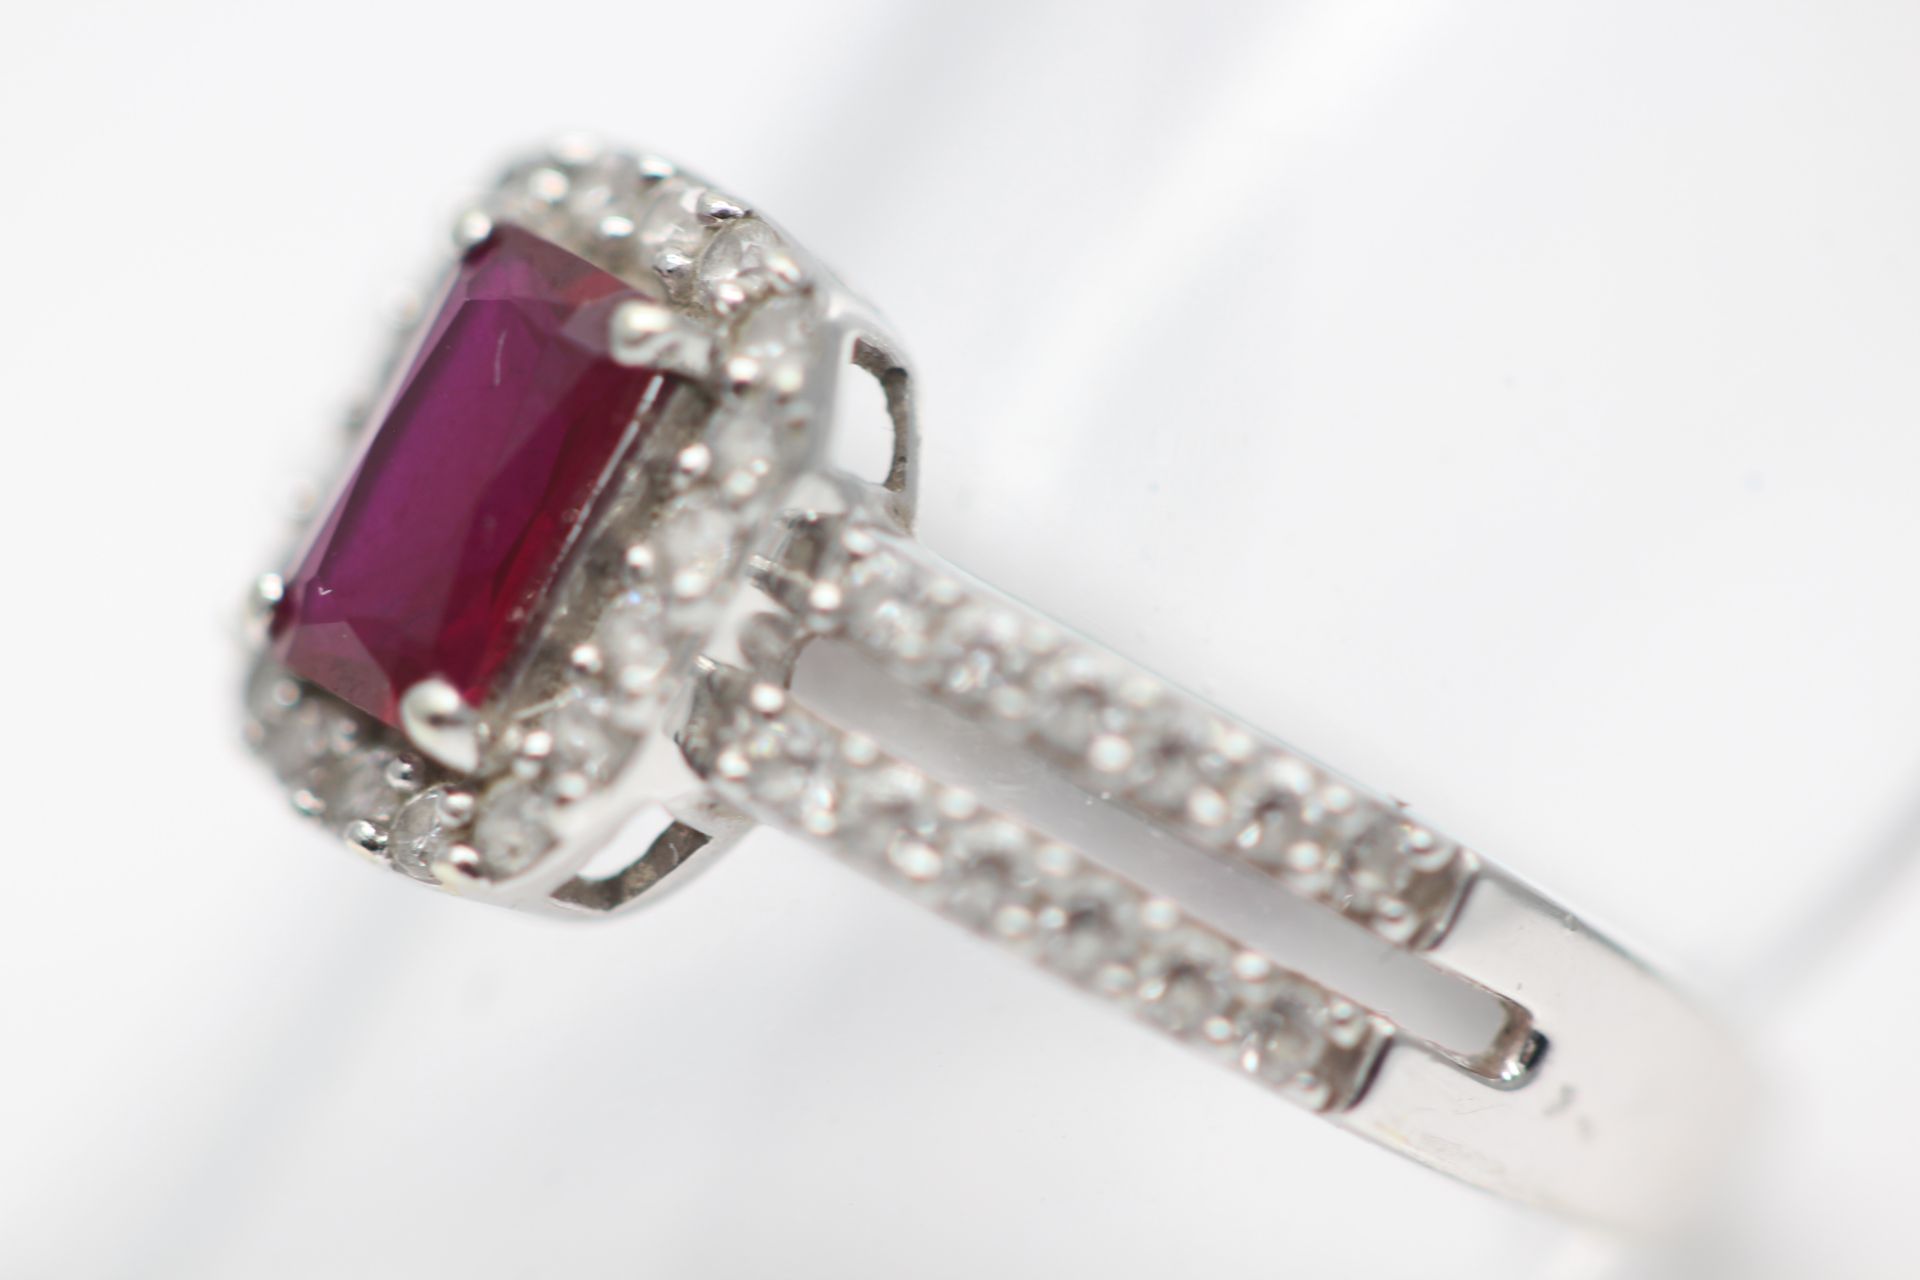 SOLID WHITE GOLD LADIES RING SET WITH A SINGLE EMERALD CUT NATURAL RED RUBY WITH DIAMONDS (PV-JH) - Image 3 of 3